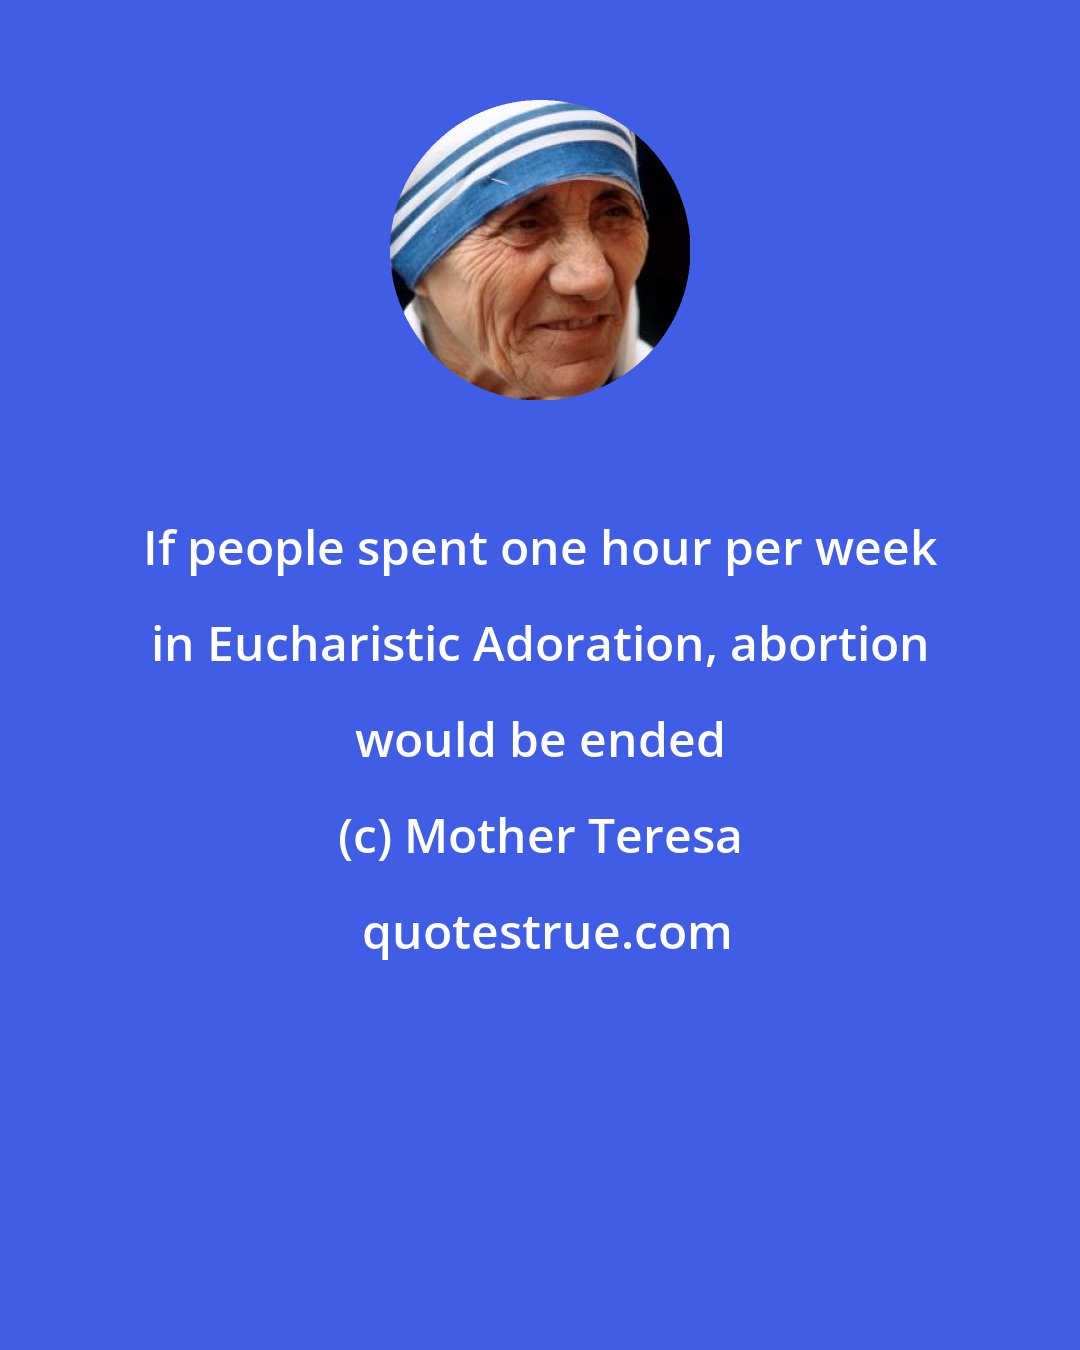 Mother Teresa: If people spent one hour per week in Eucharistic Adoration, abortion would be ended